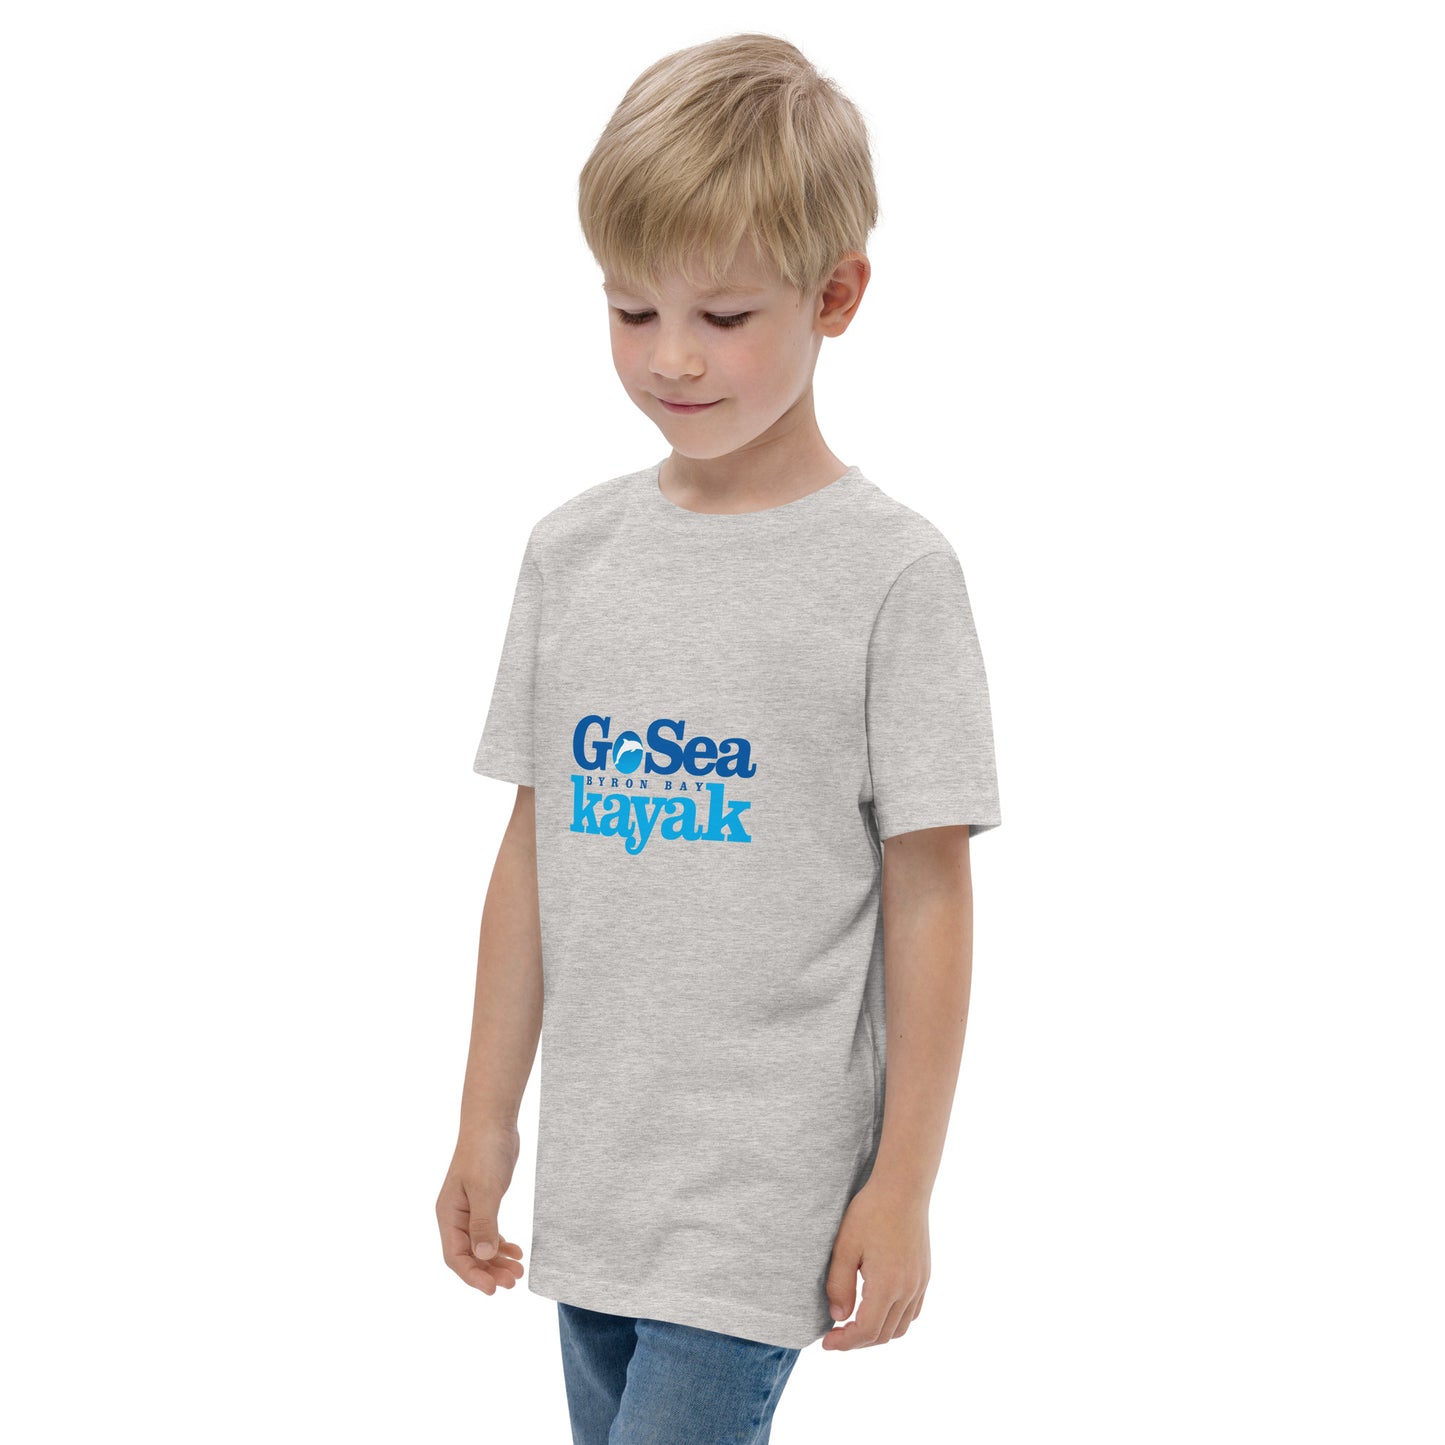  Kids T-Shirt - Natural / Heather colour - side view, being warn on boy standing with his arms by his side - Go Sea Kayak Byron Bay logo on front - Genuine Byron Bay Merchandise | Produced by Go Sea Kayak Byron Bay 